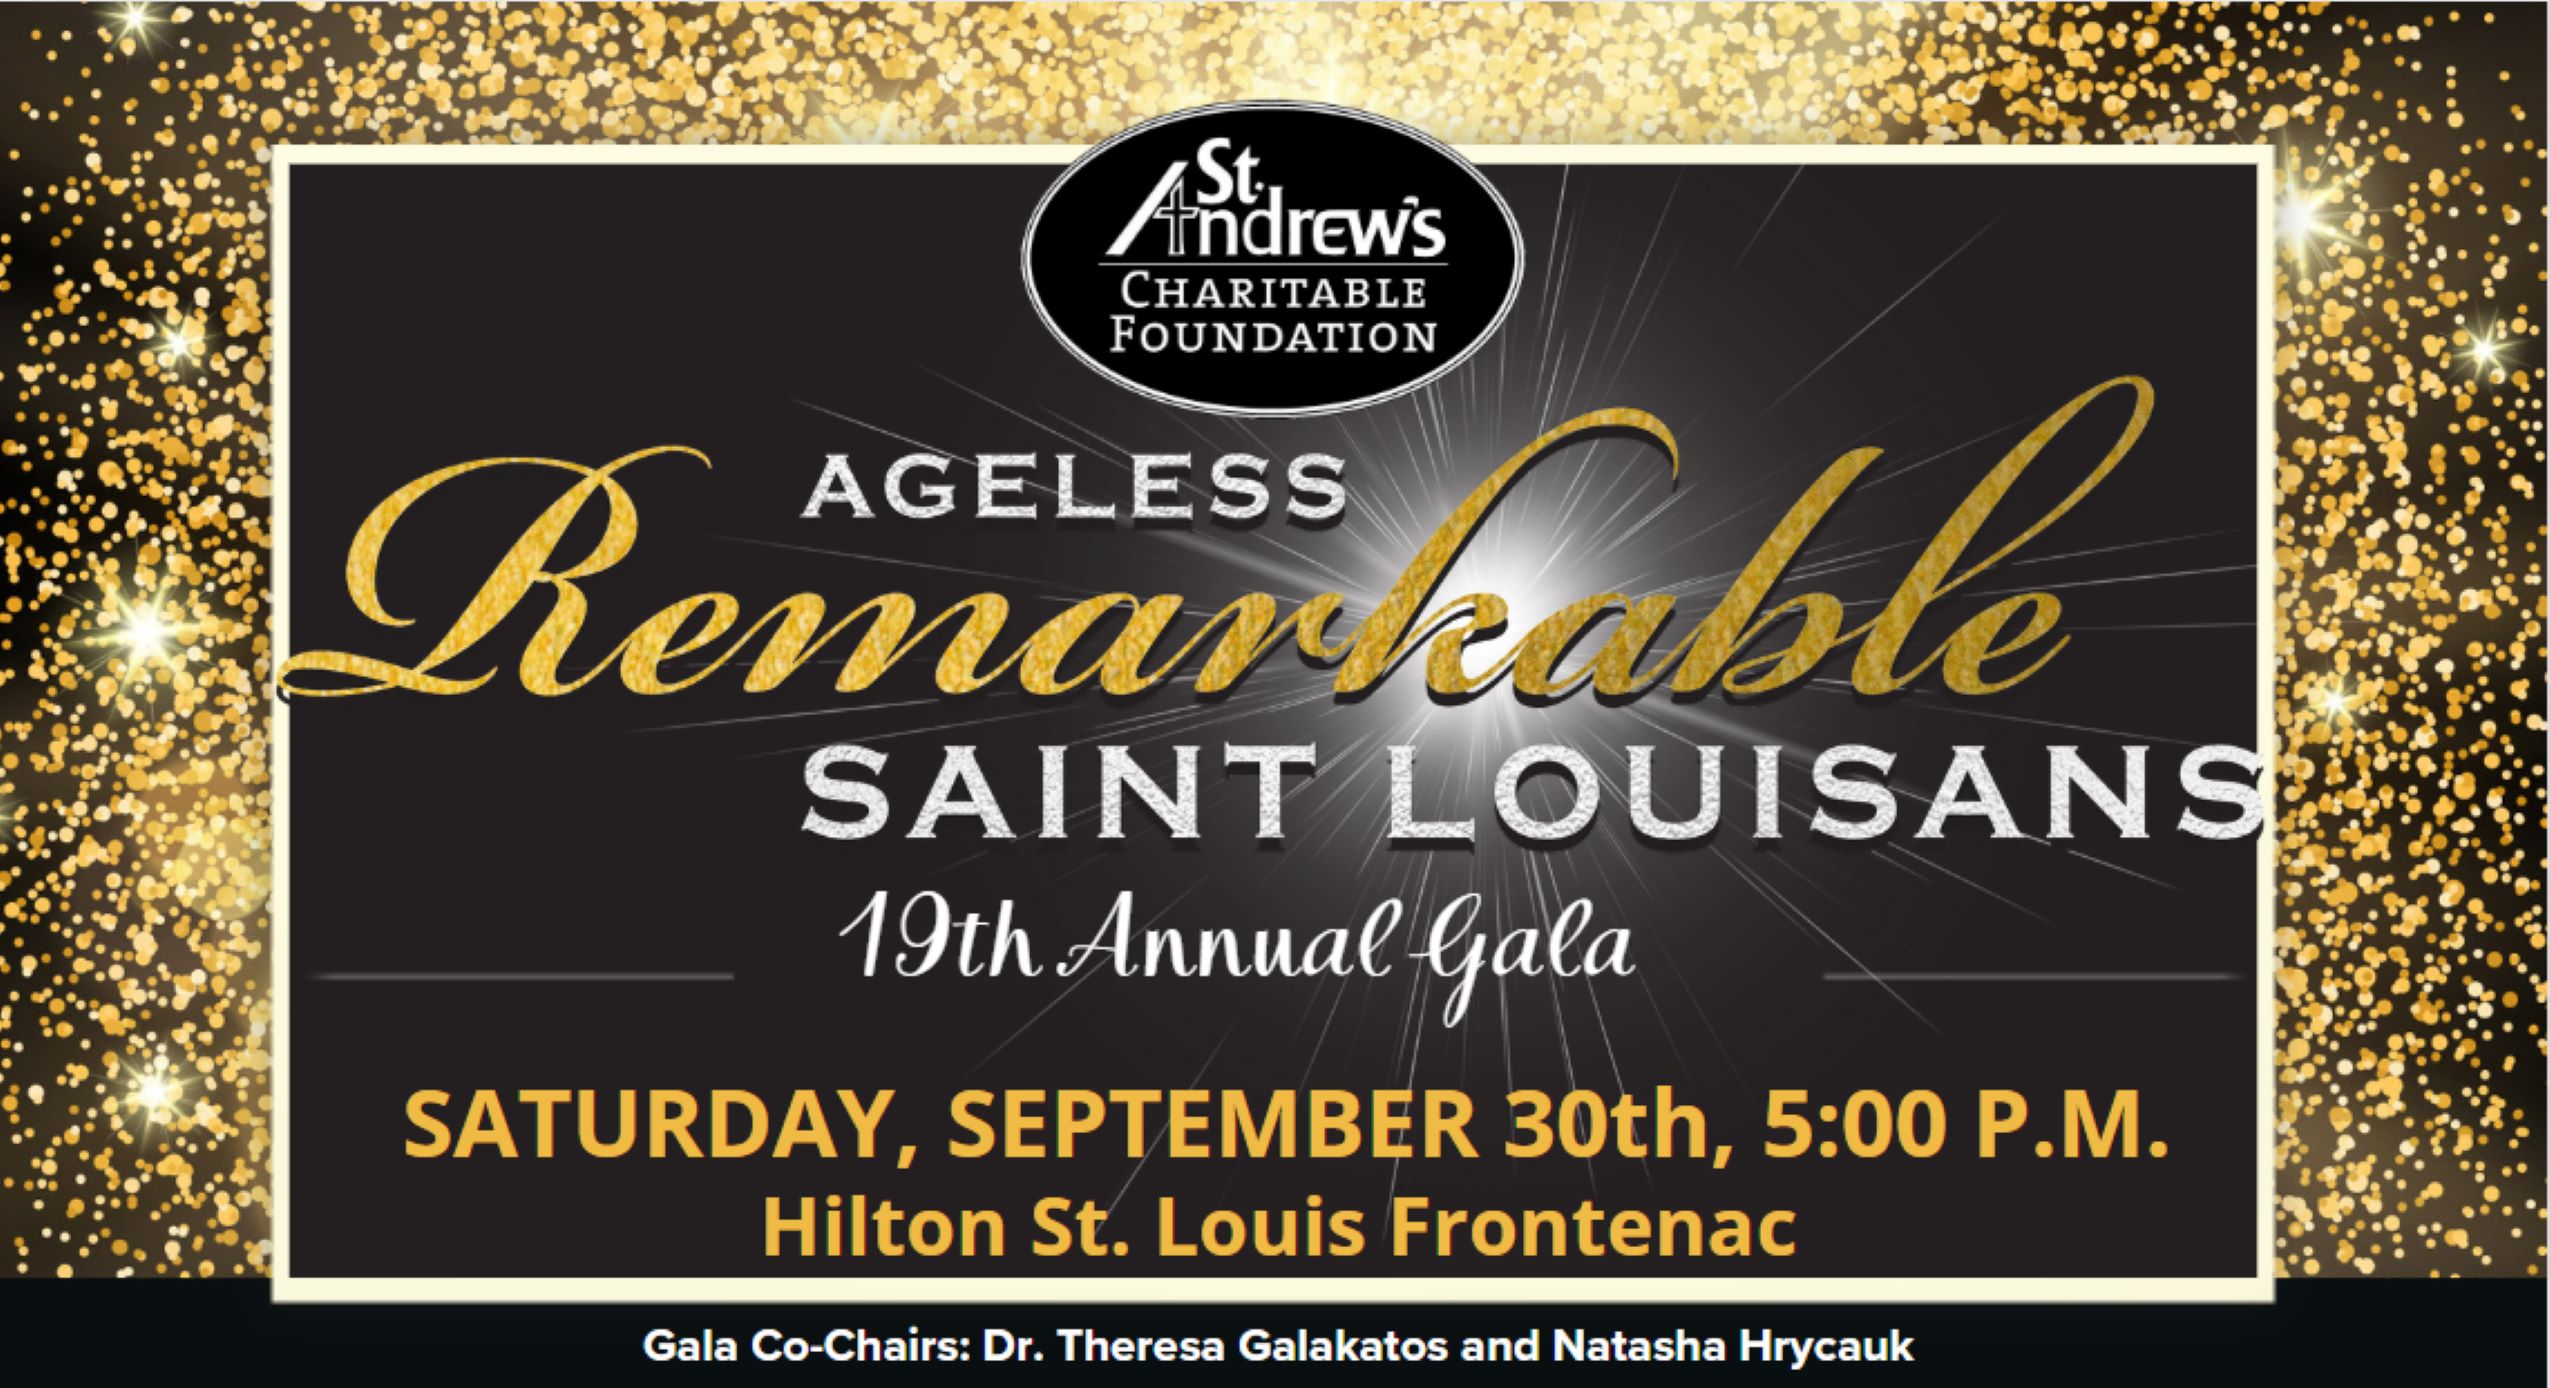 Ageless Remarkable St. Louisans 19th Annual Gala